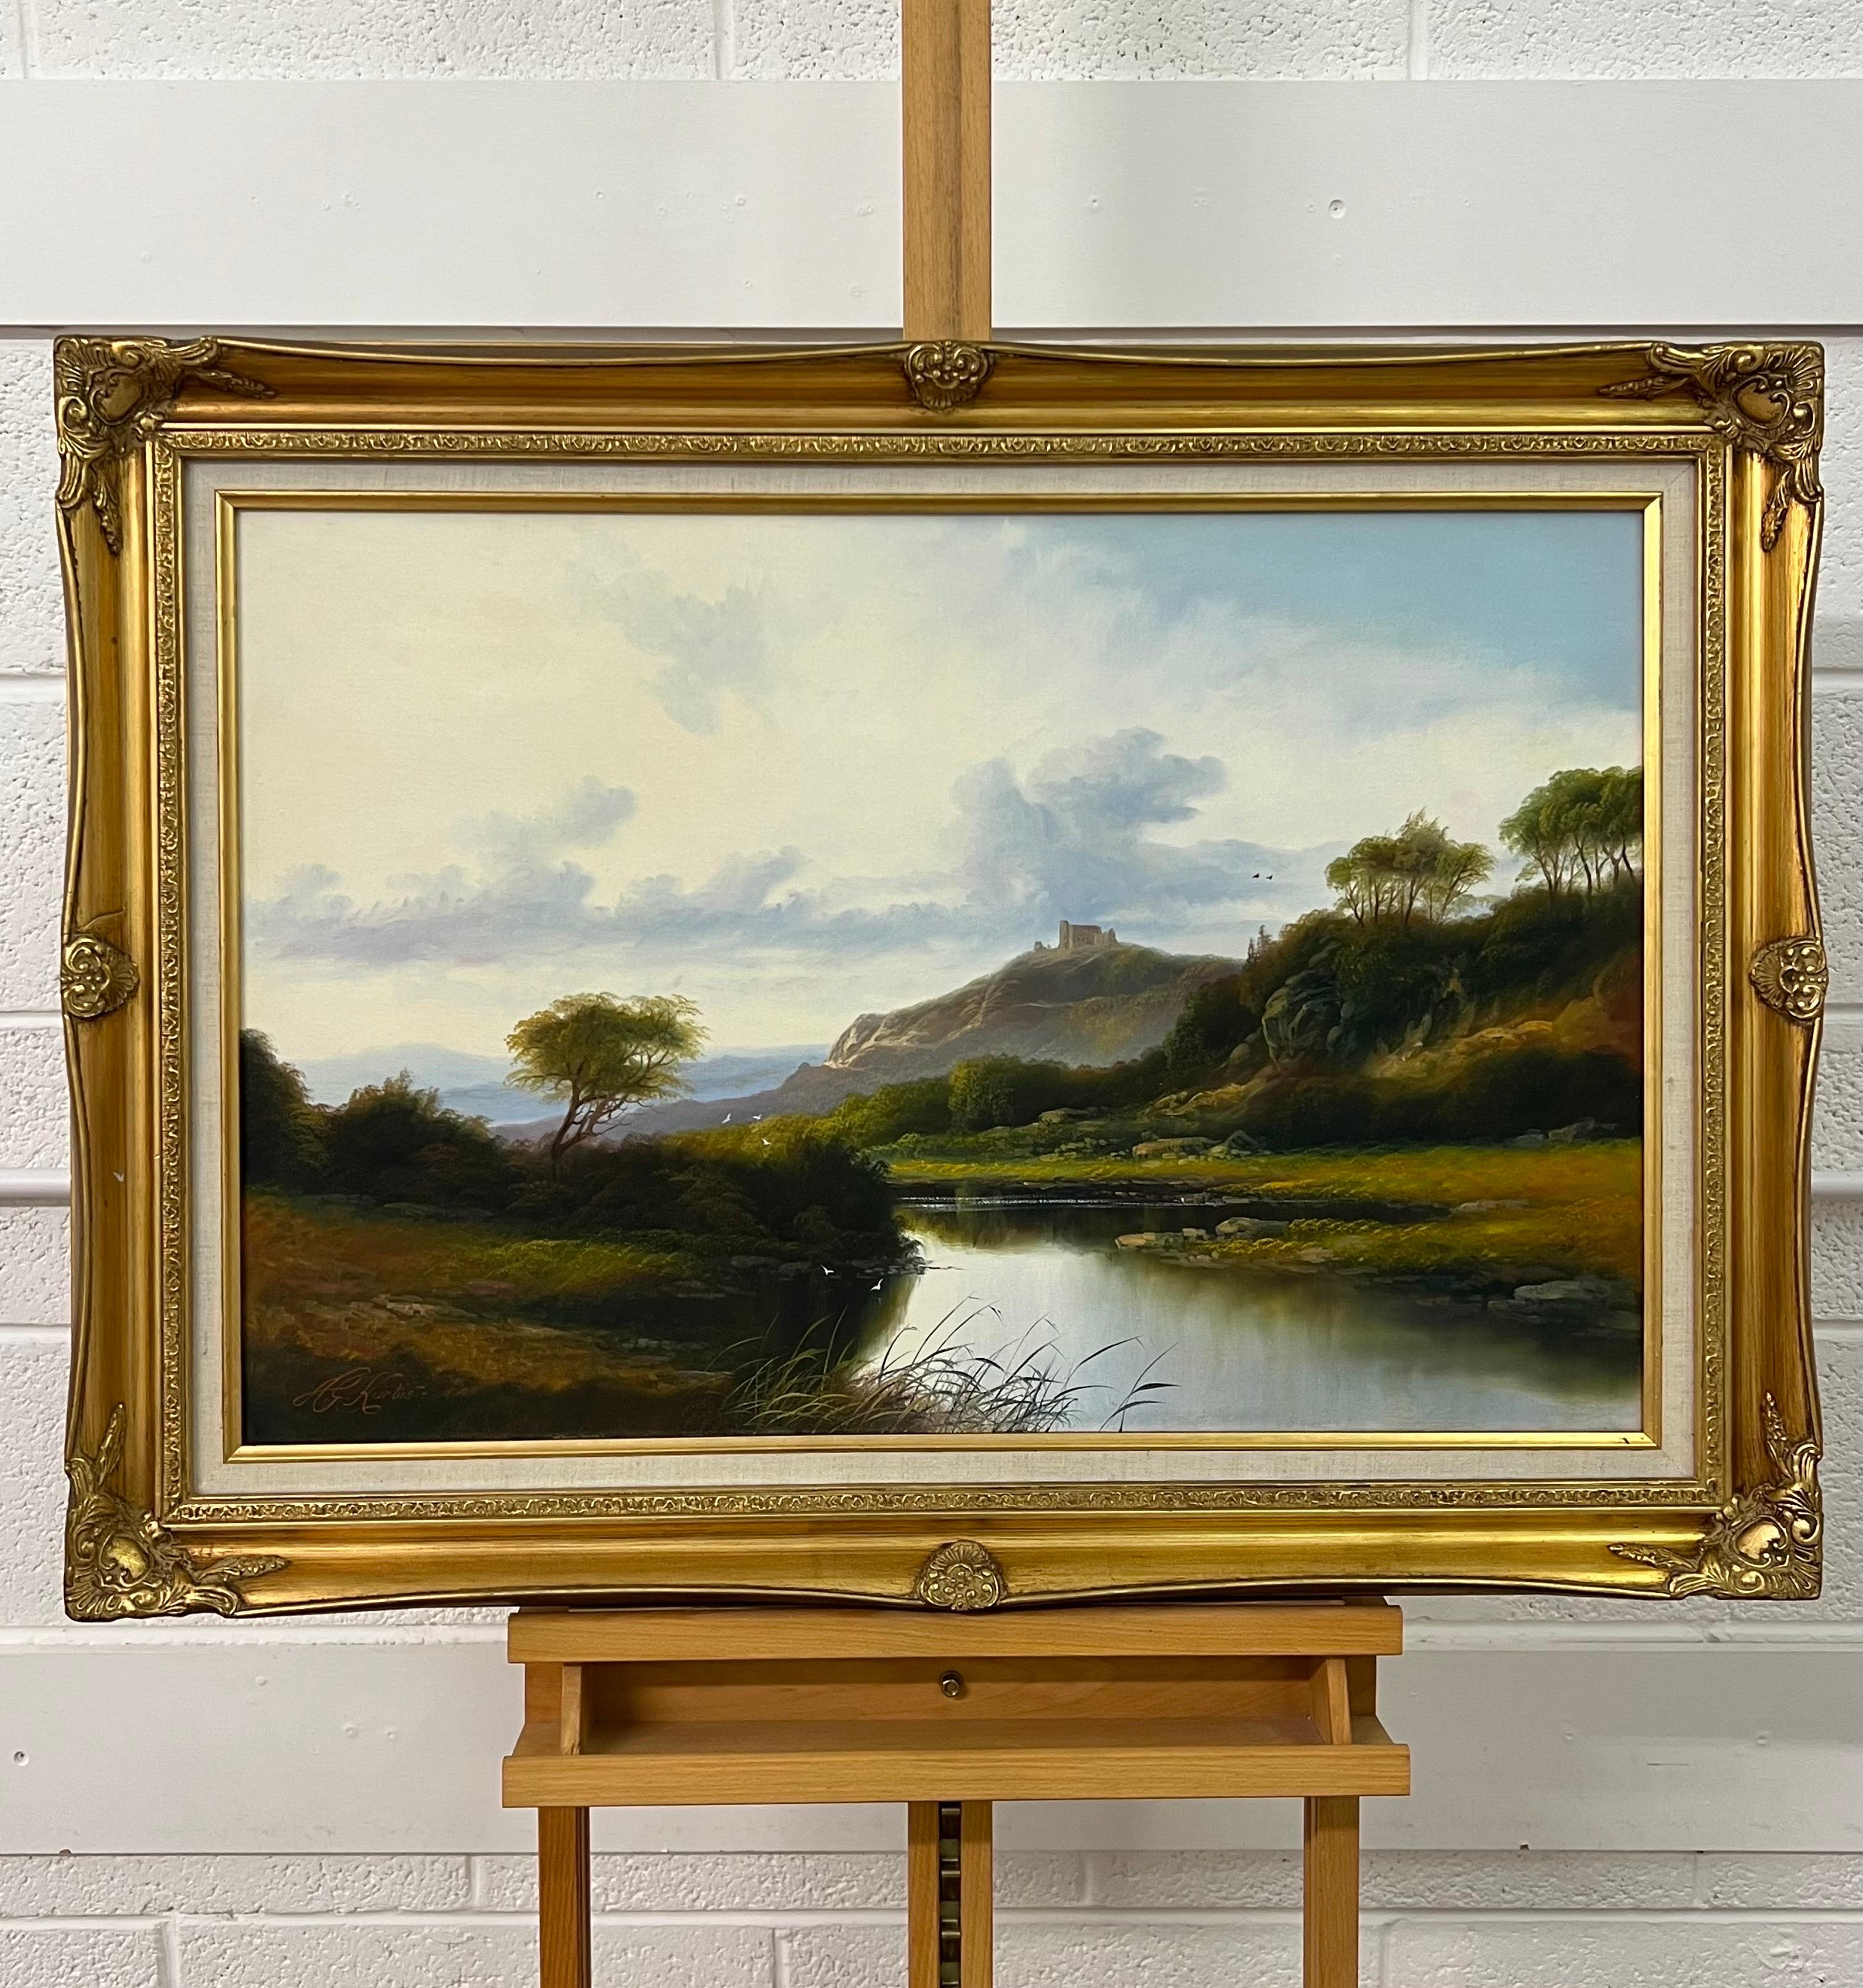 Mountain Lake in Spring Oil Painting of the Scottish Highlands by British Artist by British Artist, Andrew Grant Kurtis M.A.(Lon) B.Des.(Hons) L.S.I.A.D. 

Art measures 30 x 20 inches 
Frame measures 36 x 26 inches 
Presented in the original period